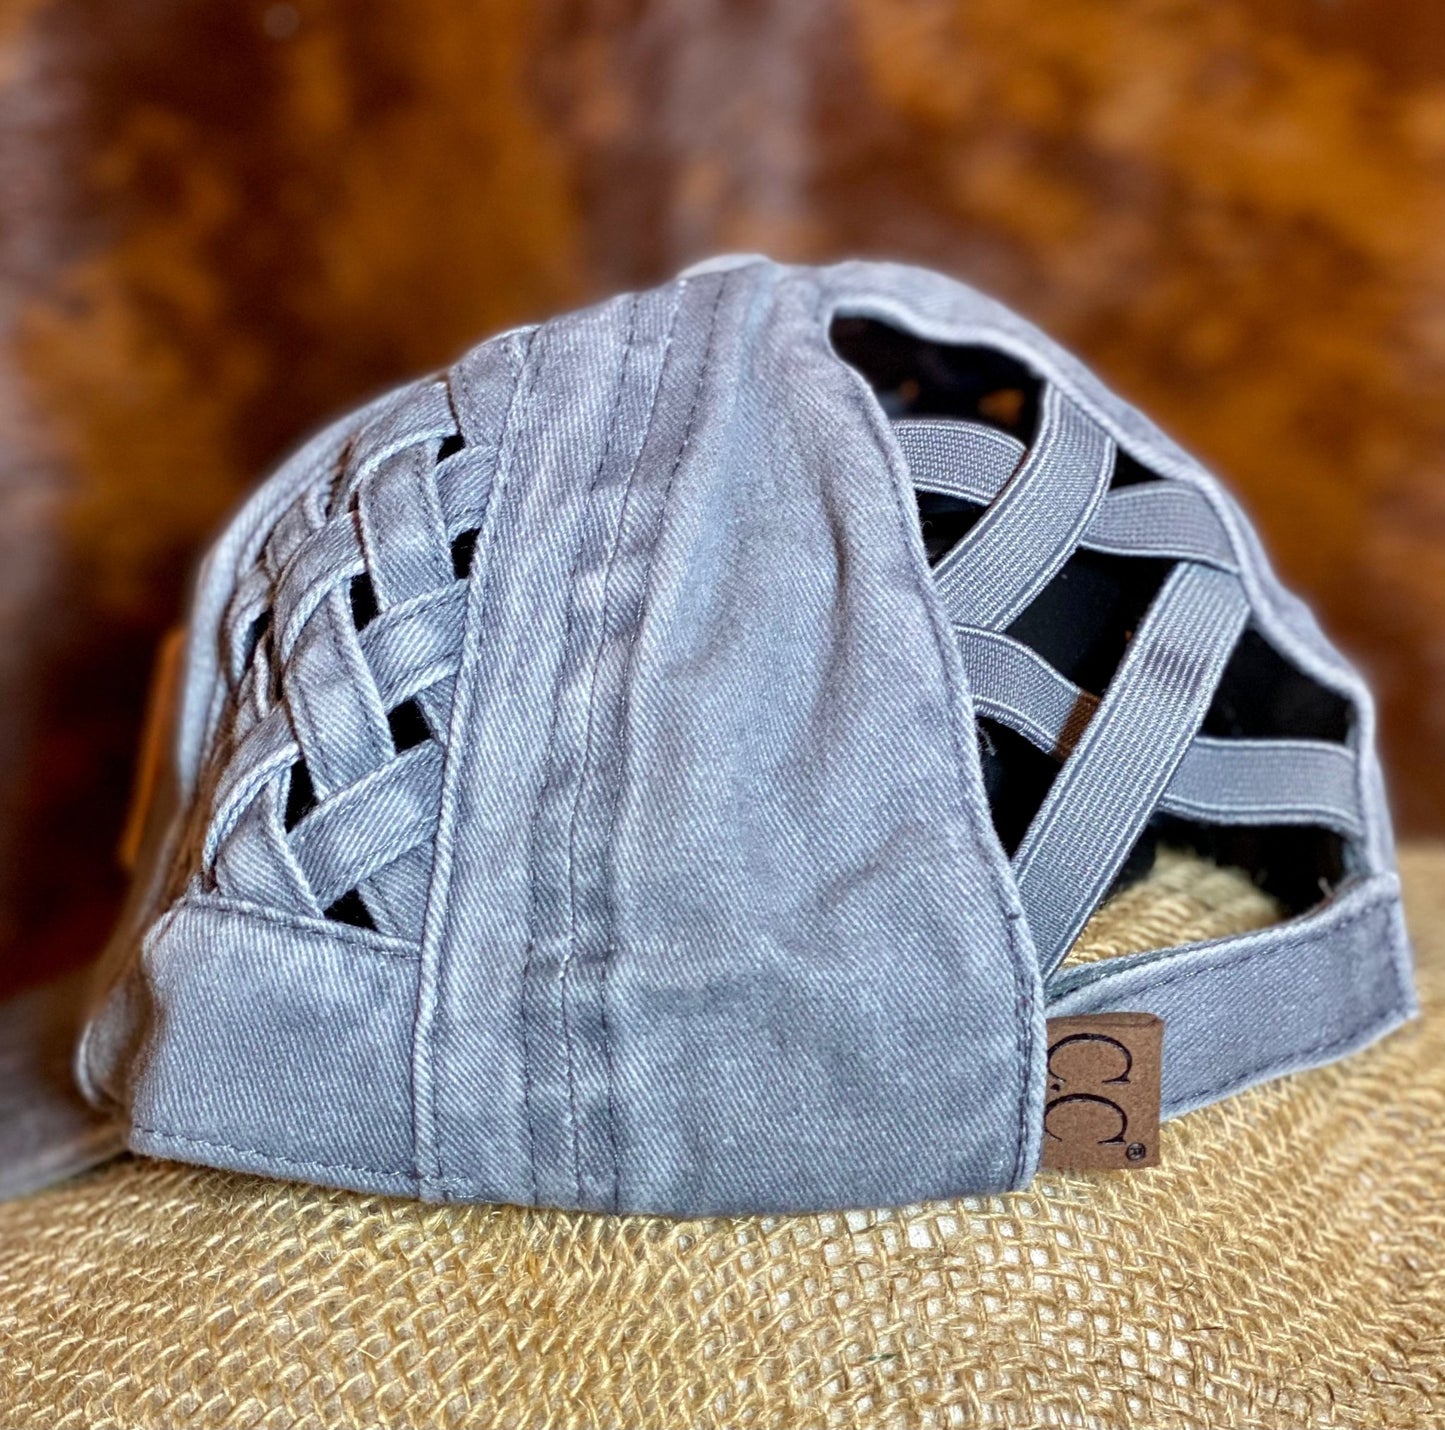 Lake Life Ponytail Cap - CountryFide Custom Accessories and Outdoors